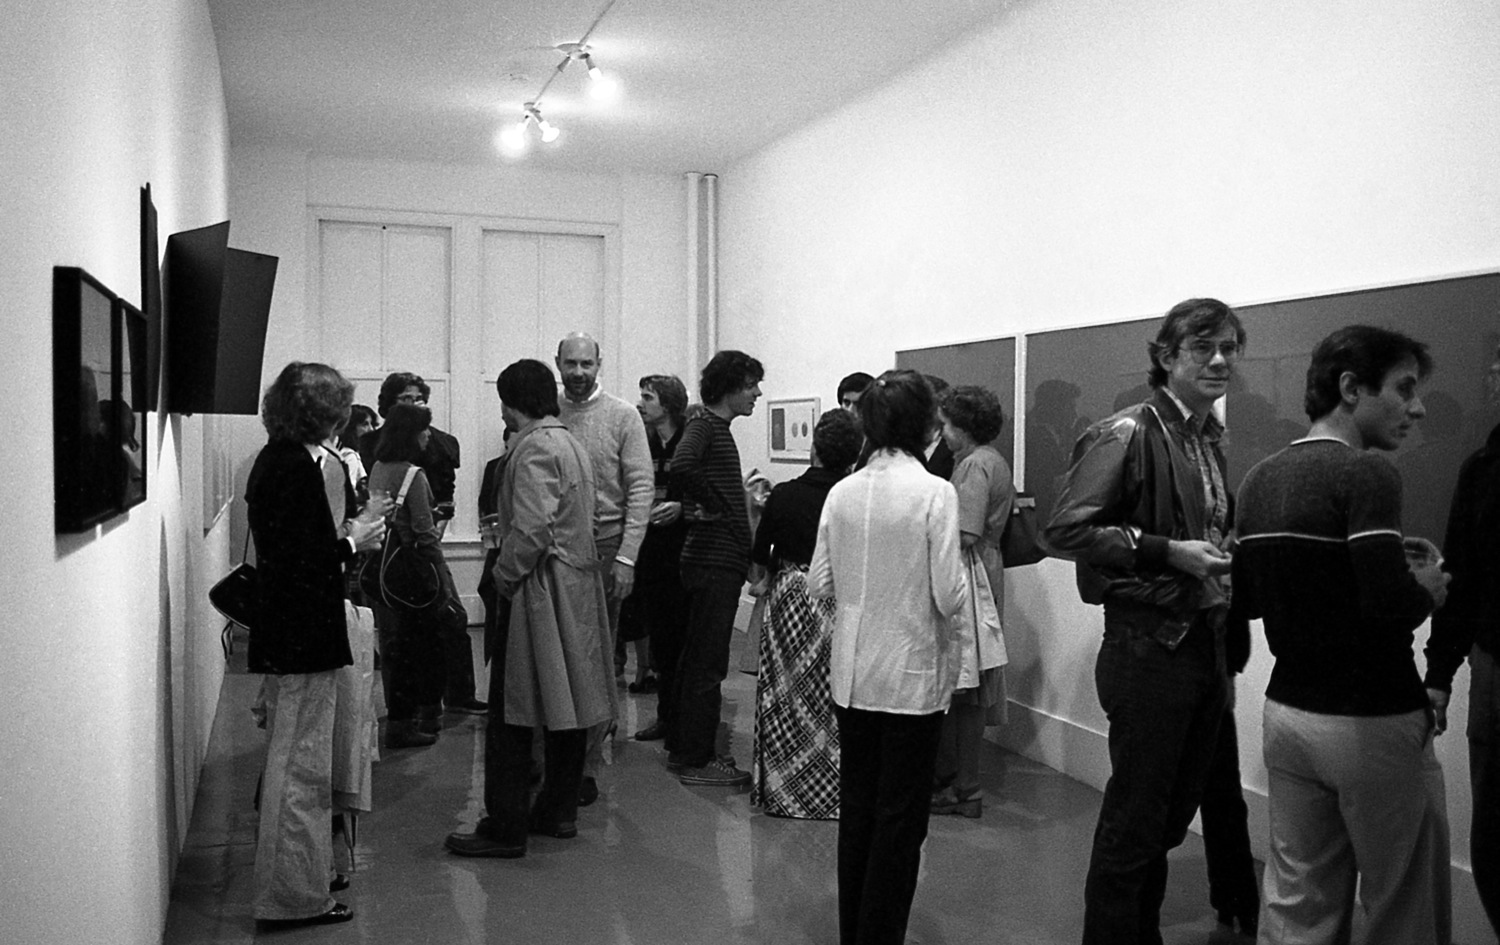 Opening of Pictures at Artists Space, September 1977. Photo by D. James Dee. Courtesy of Artists Space.